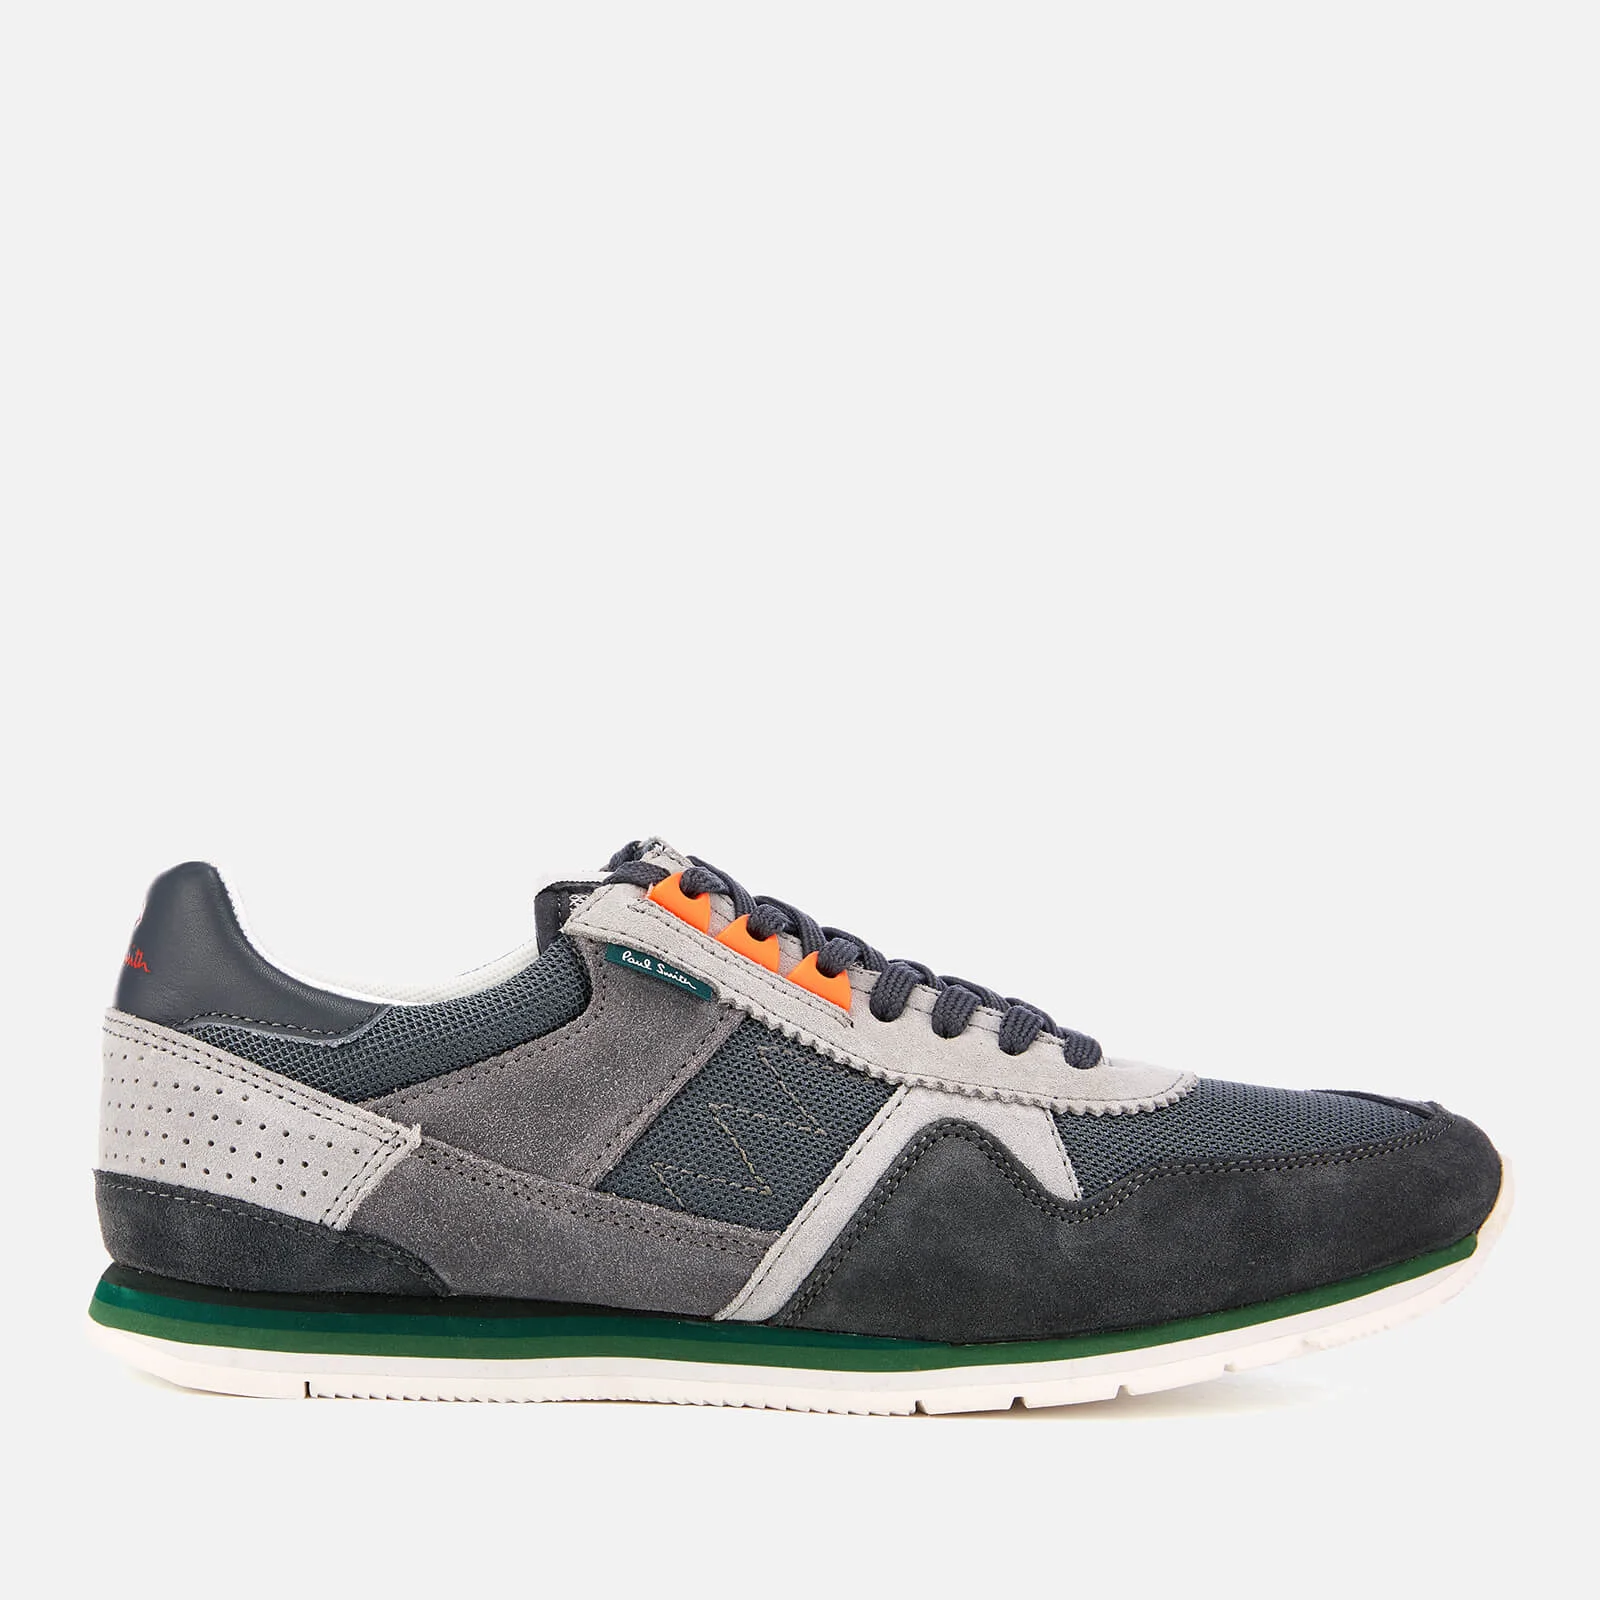 PS Paul Smith Men's Vinny Runner Style Trainers - Anthracite Image 1